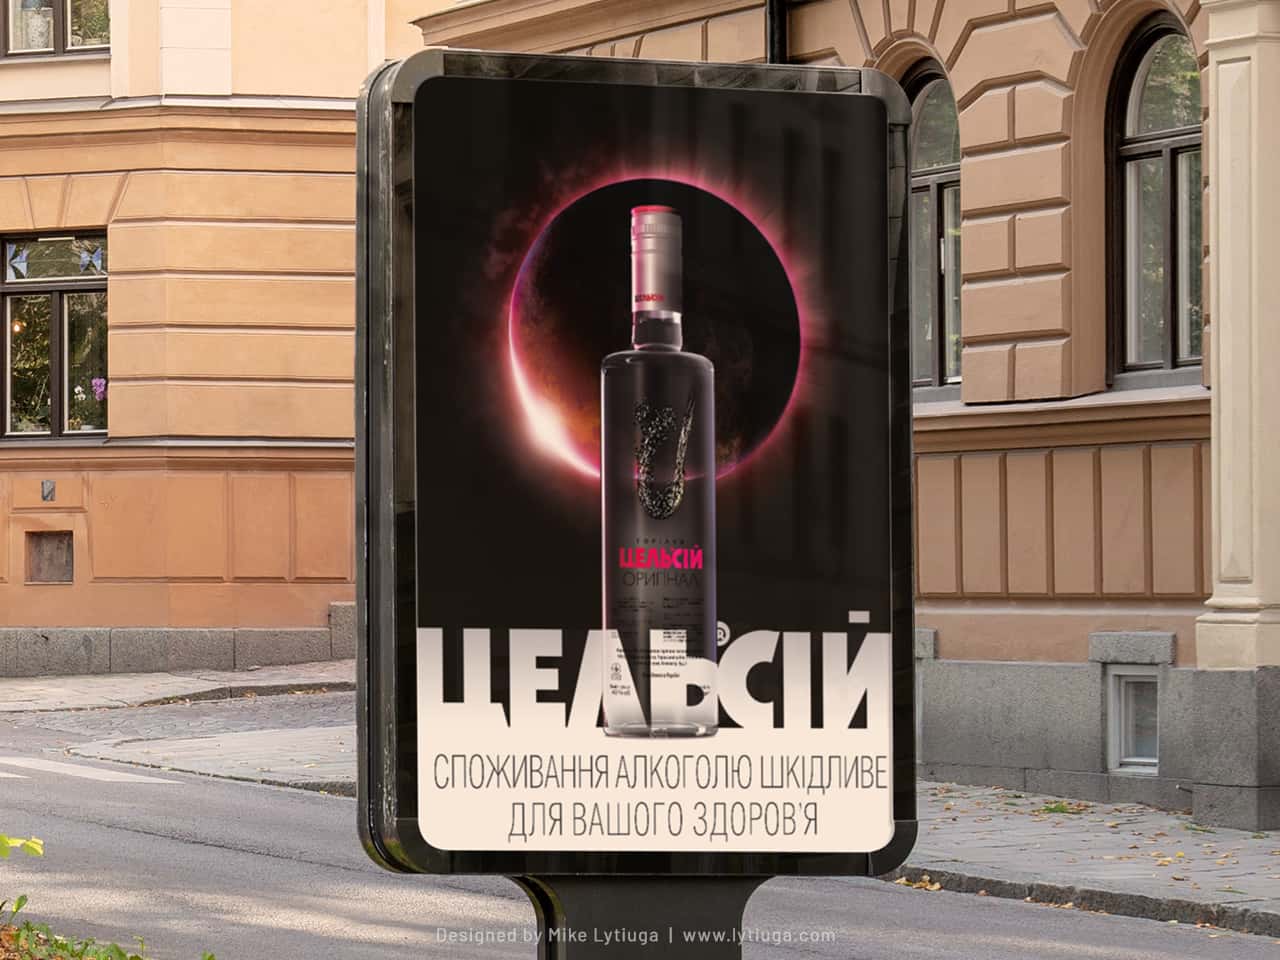 Celsiy vodka outdoor advertising campaign poster